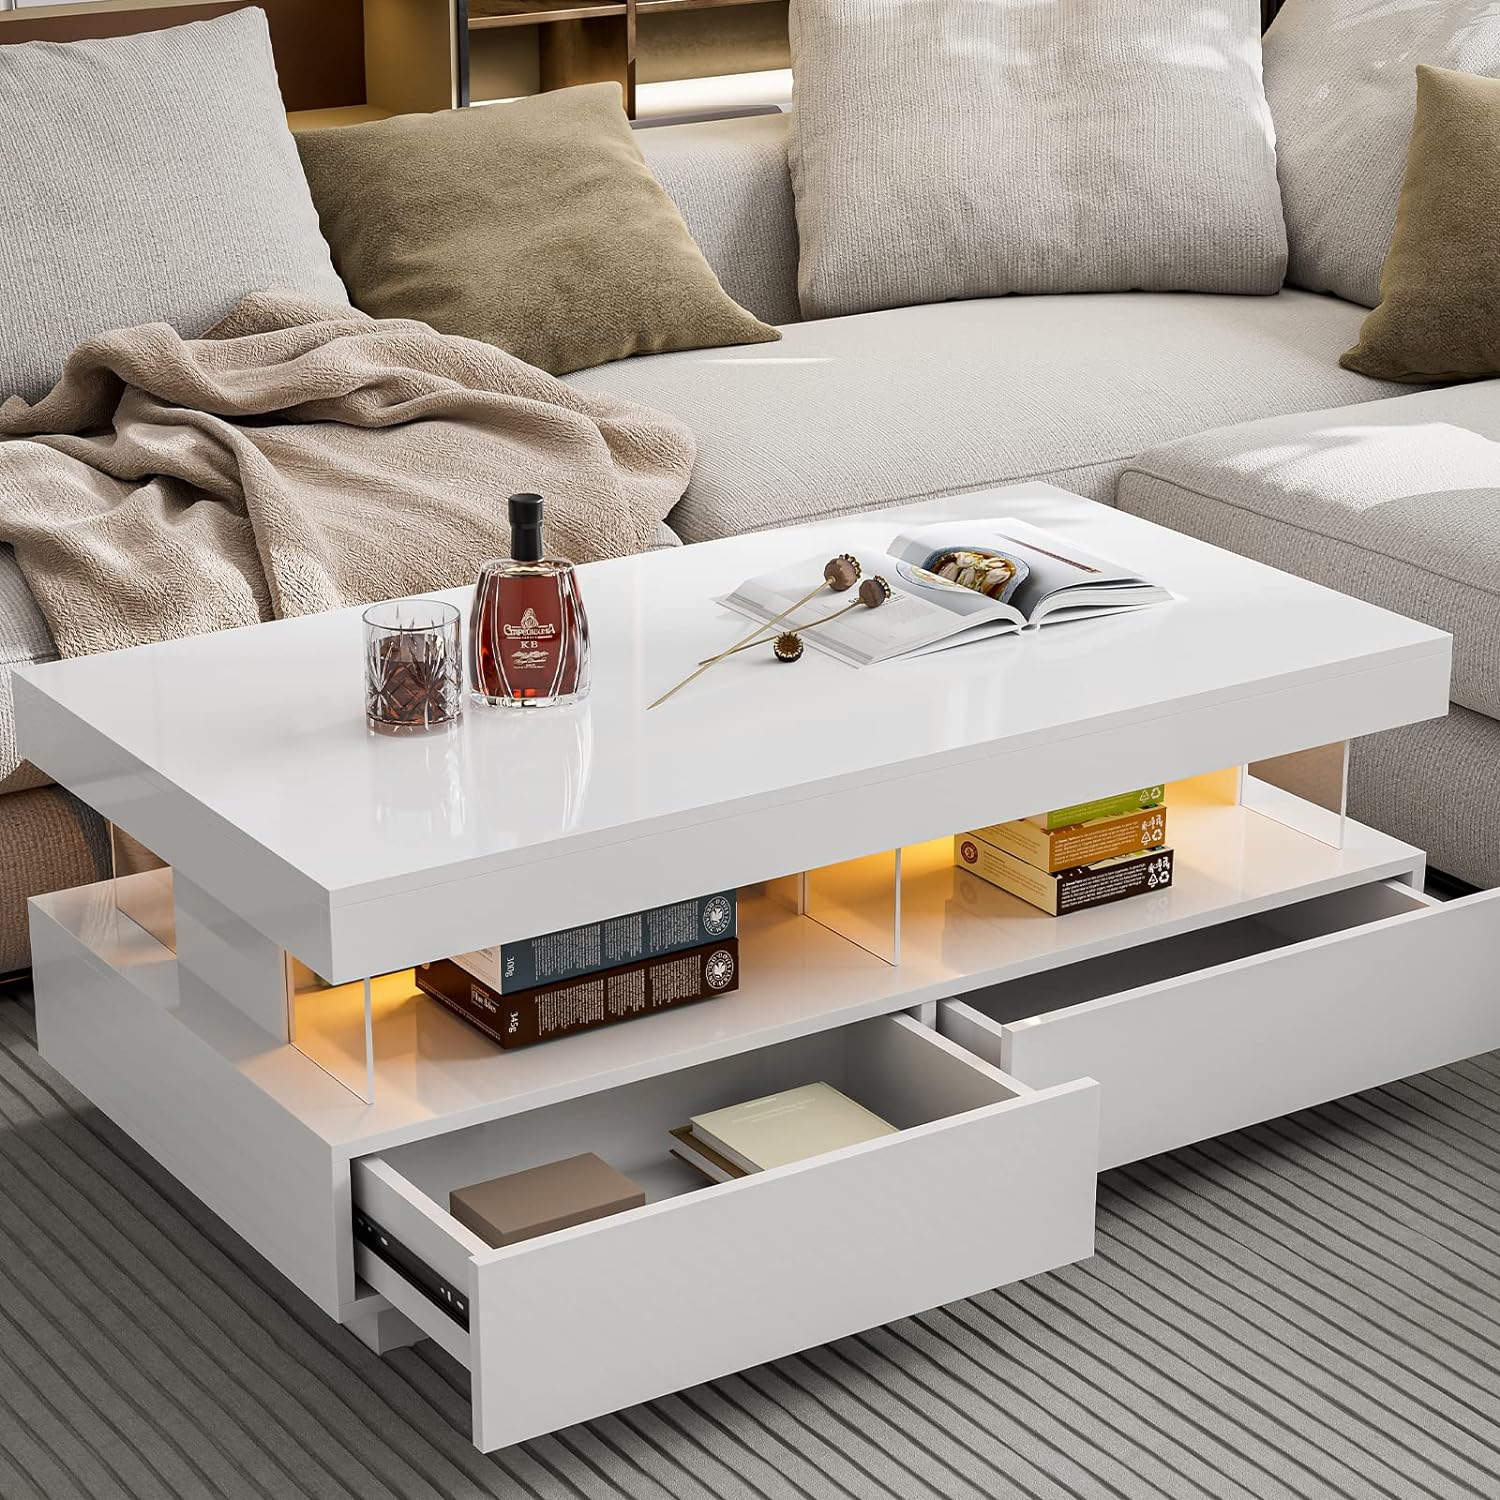 IKIFLY Modern LED Coffee Table, White High Glossy Coffee Table with Acrylic Design Open Space and 2 Storage Drawers, Rectangle Coffee Table with 16 Colors LED Lights for Living Room Bedroom